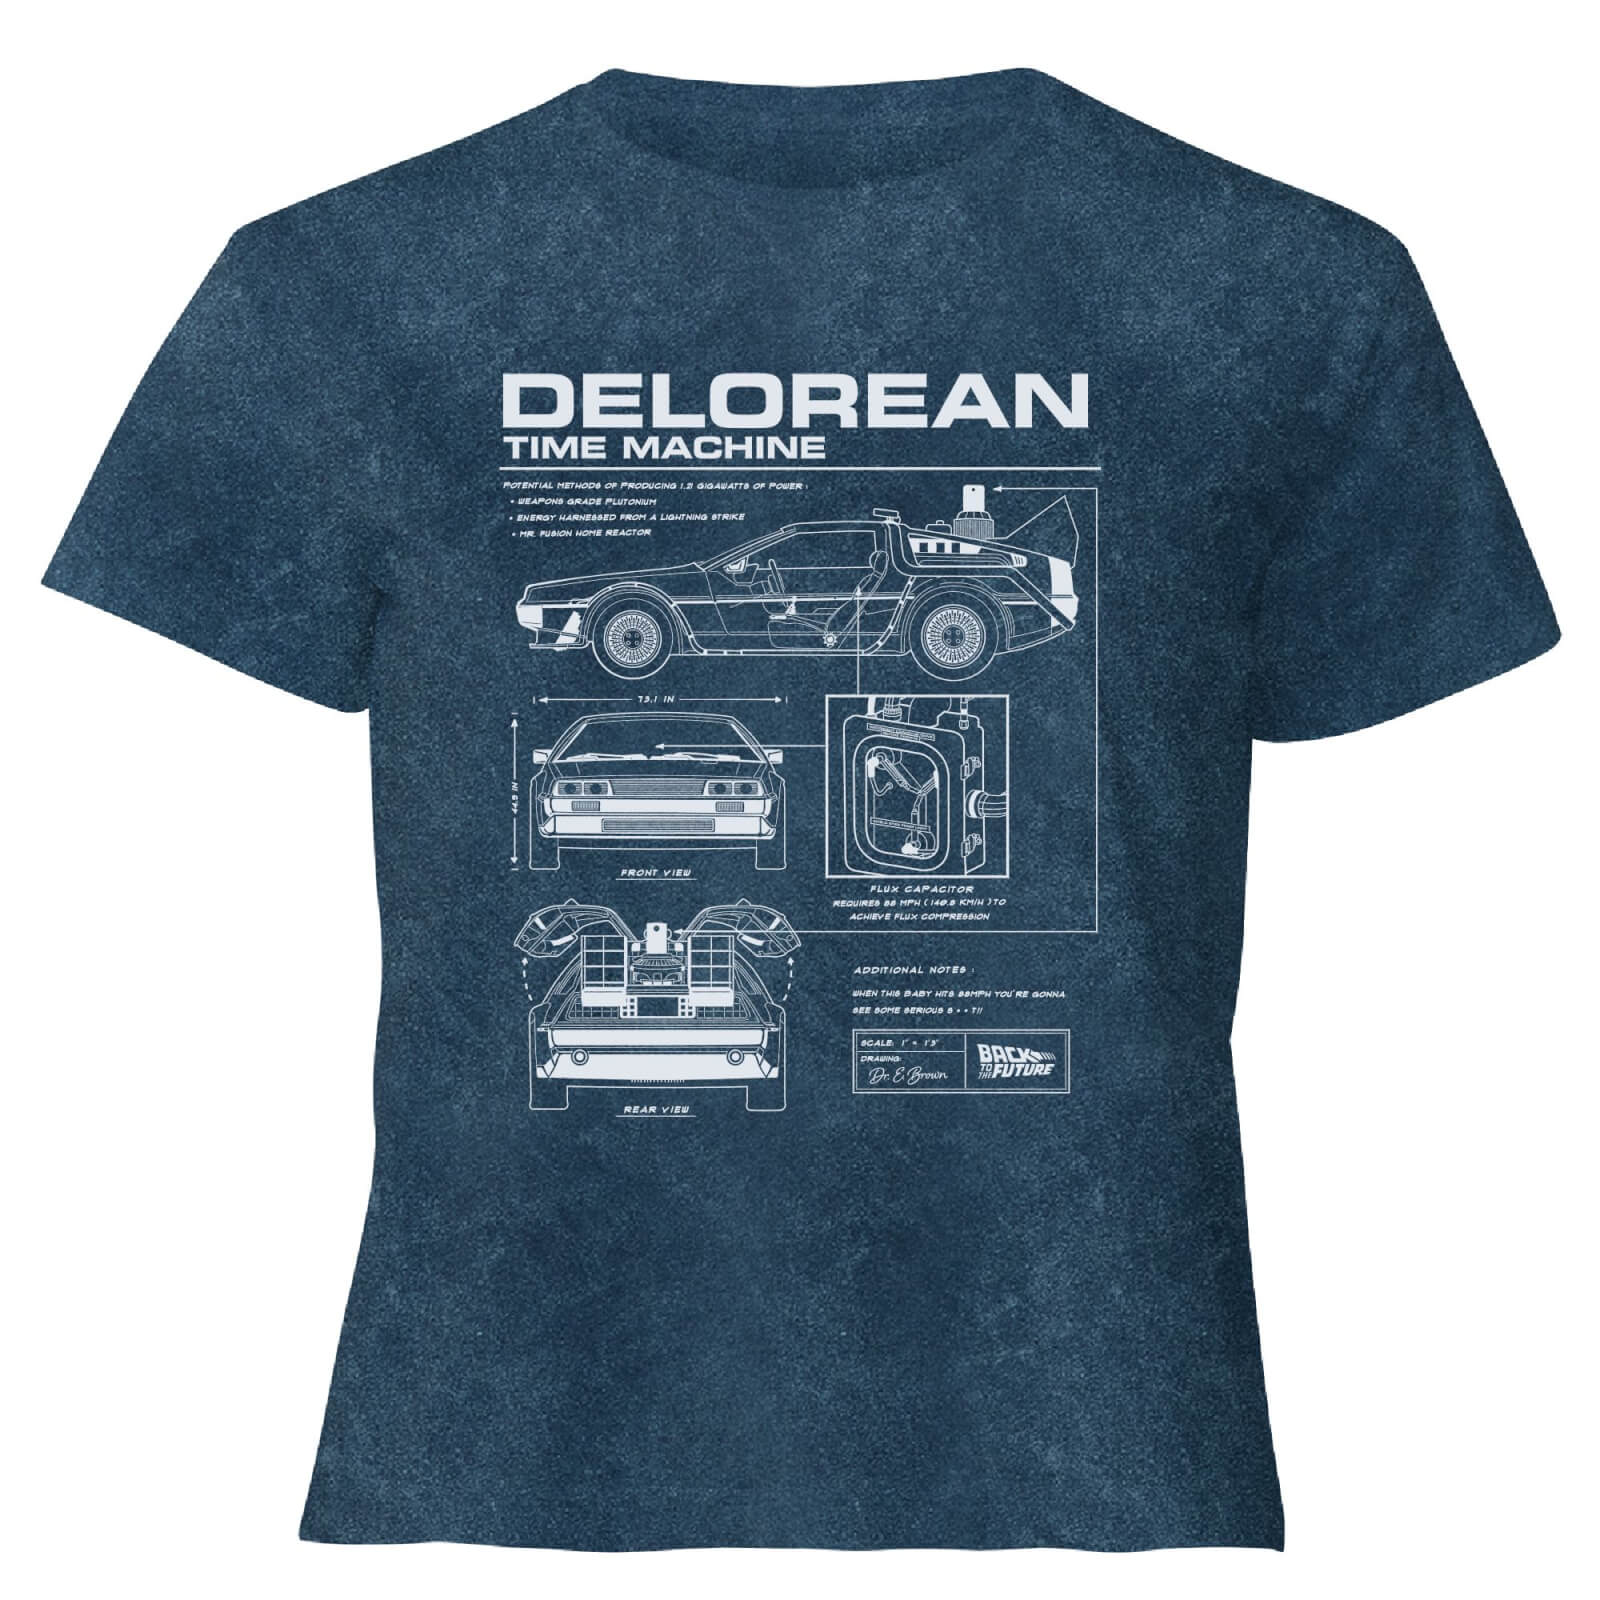 Back To The Future Delorean - Women's Cropped T-Shirt - Navy Acid Wash - XS - Navy Acid Wash